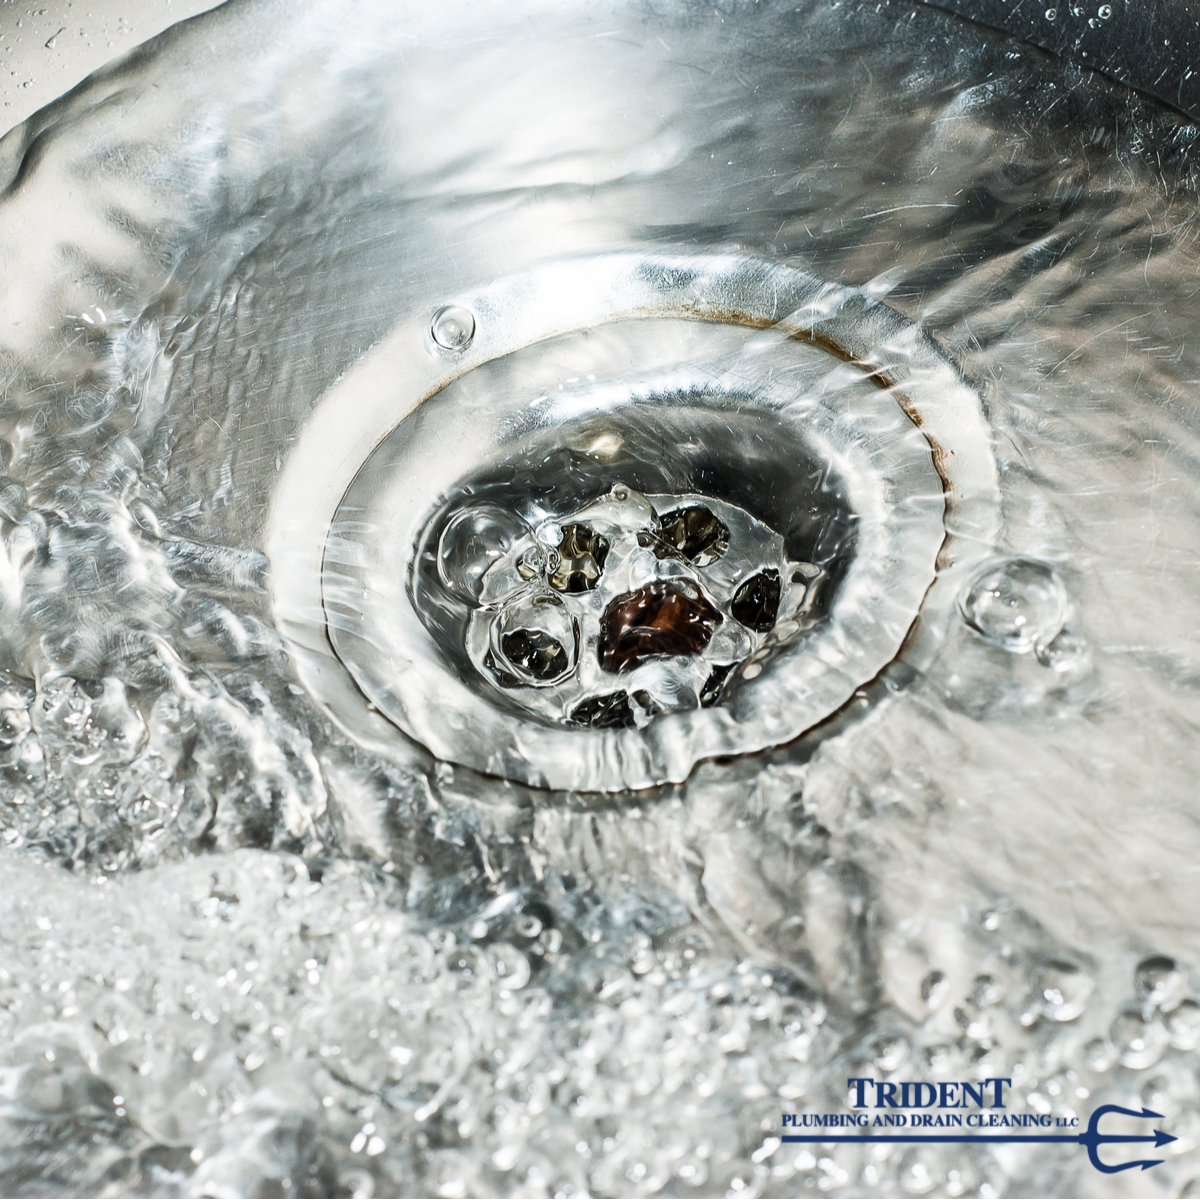 Does Your Darrington Property Need Drain Cleaning?